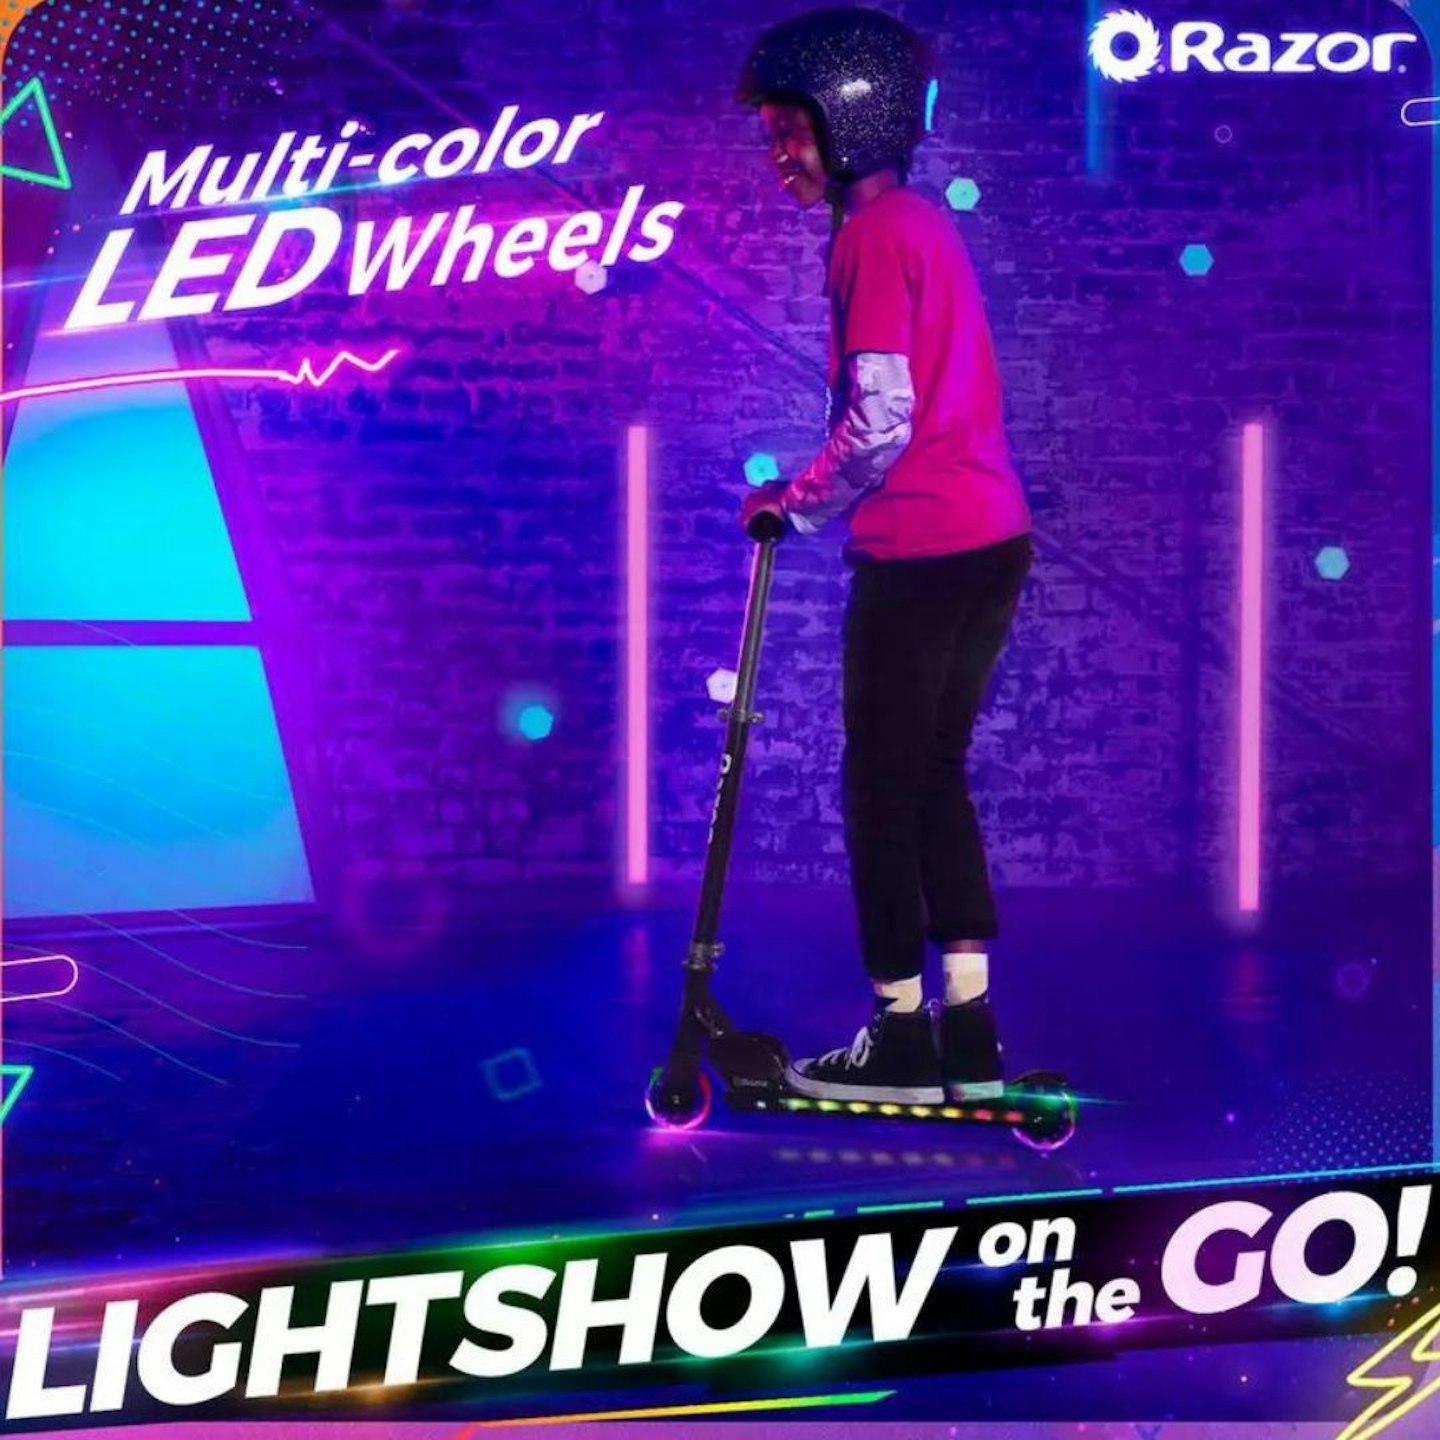 Best Christmas Gifts For Kids: Razor A+ Lightshow Folding Light Up Scooter